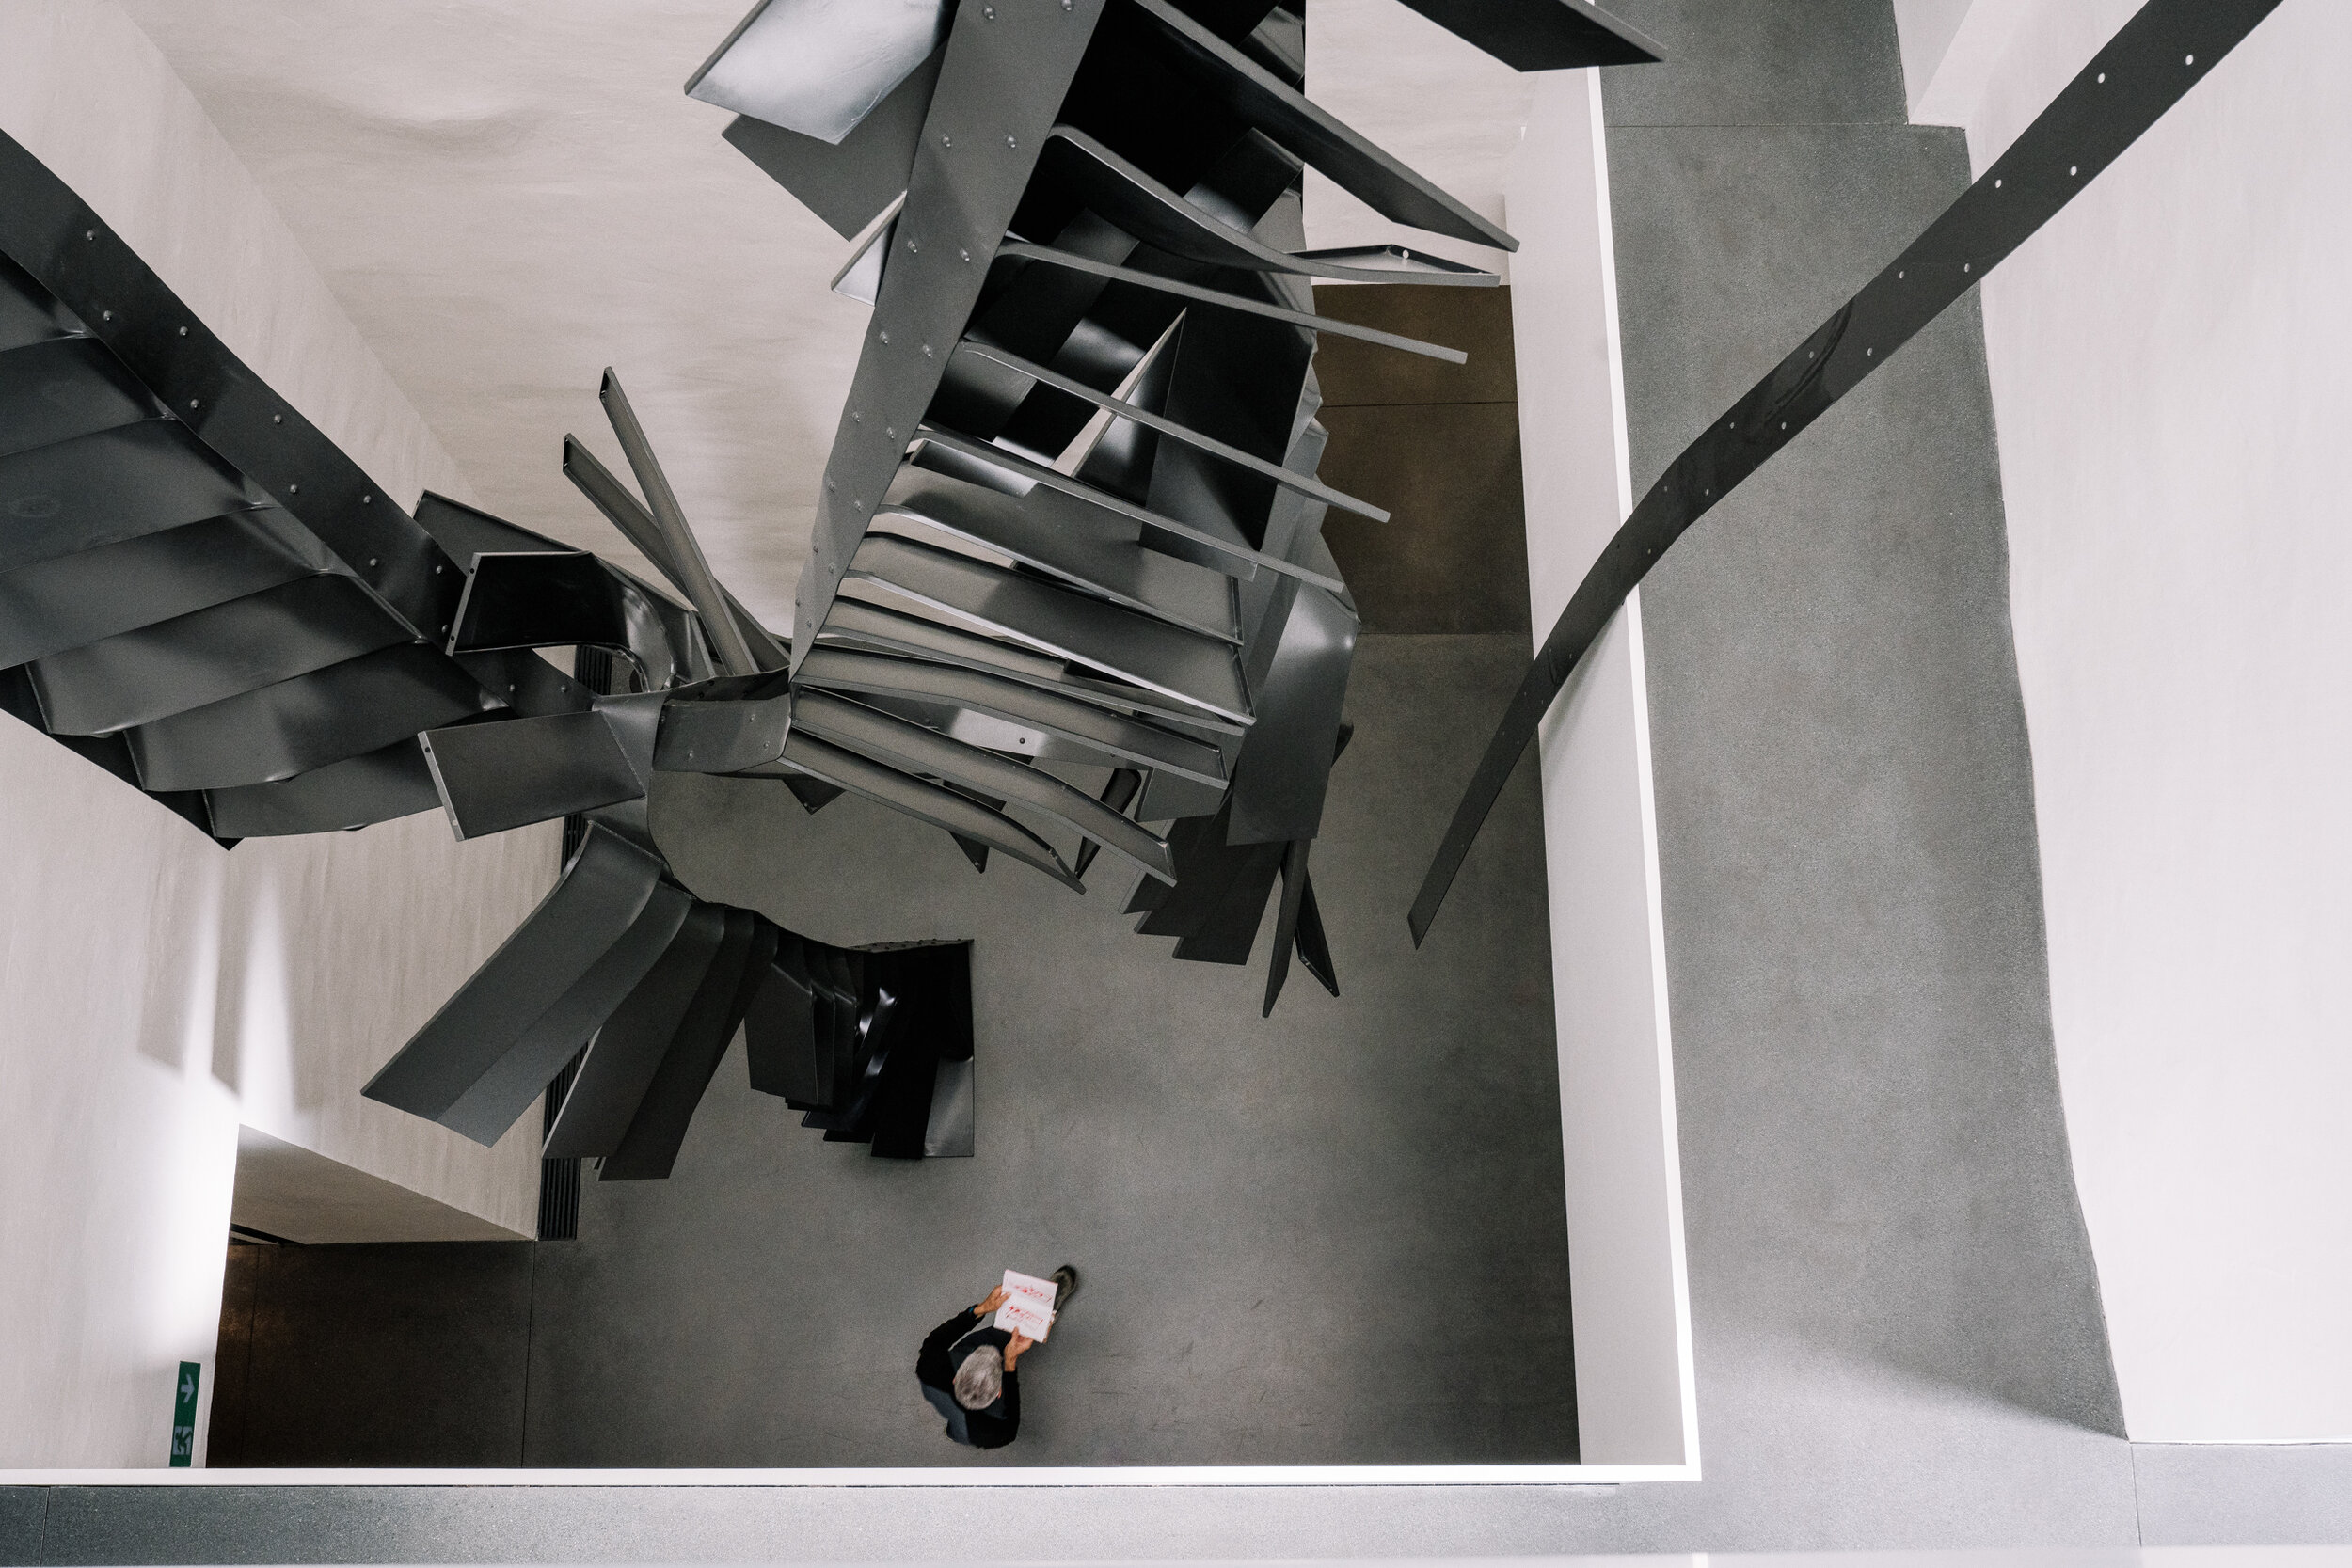  Polish artist Monika Sosnowska's "Stairs" (2016 – 2017) is a permanent installation in the part of Muzeum Susch that was formerly a brewery and is suspended from the ceiling. 